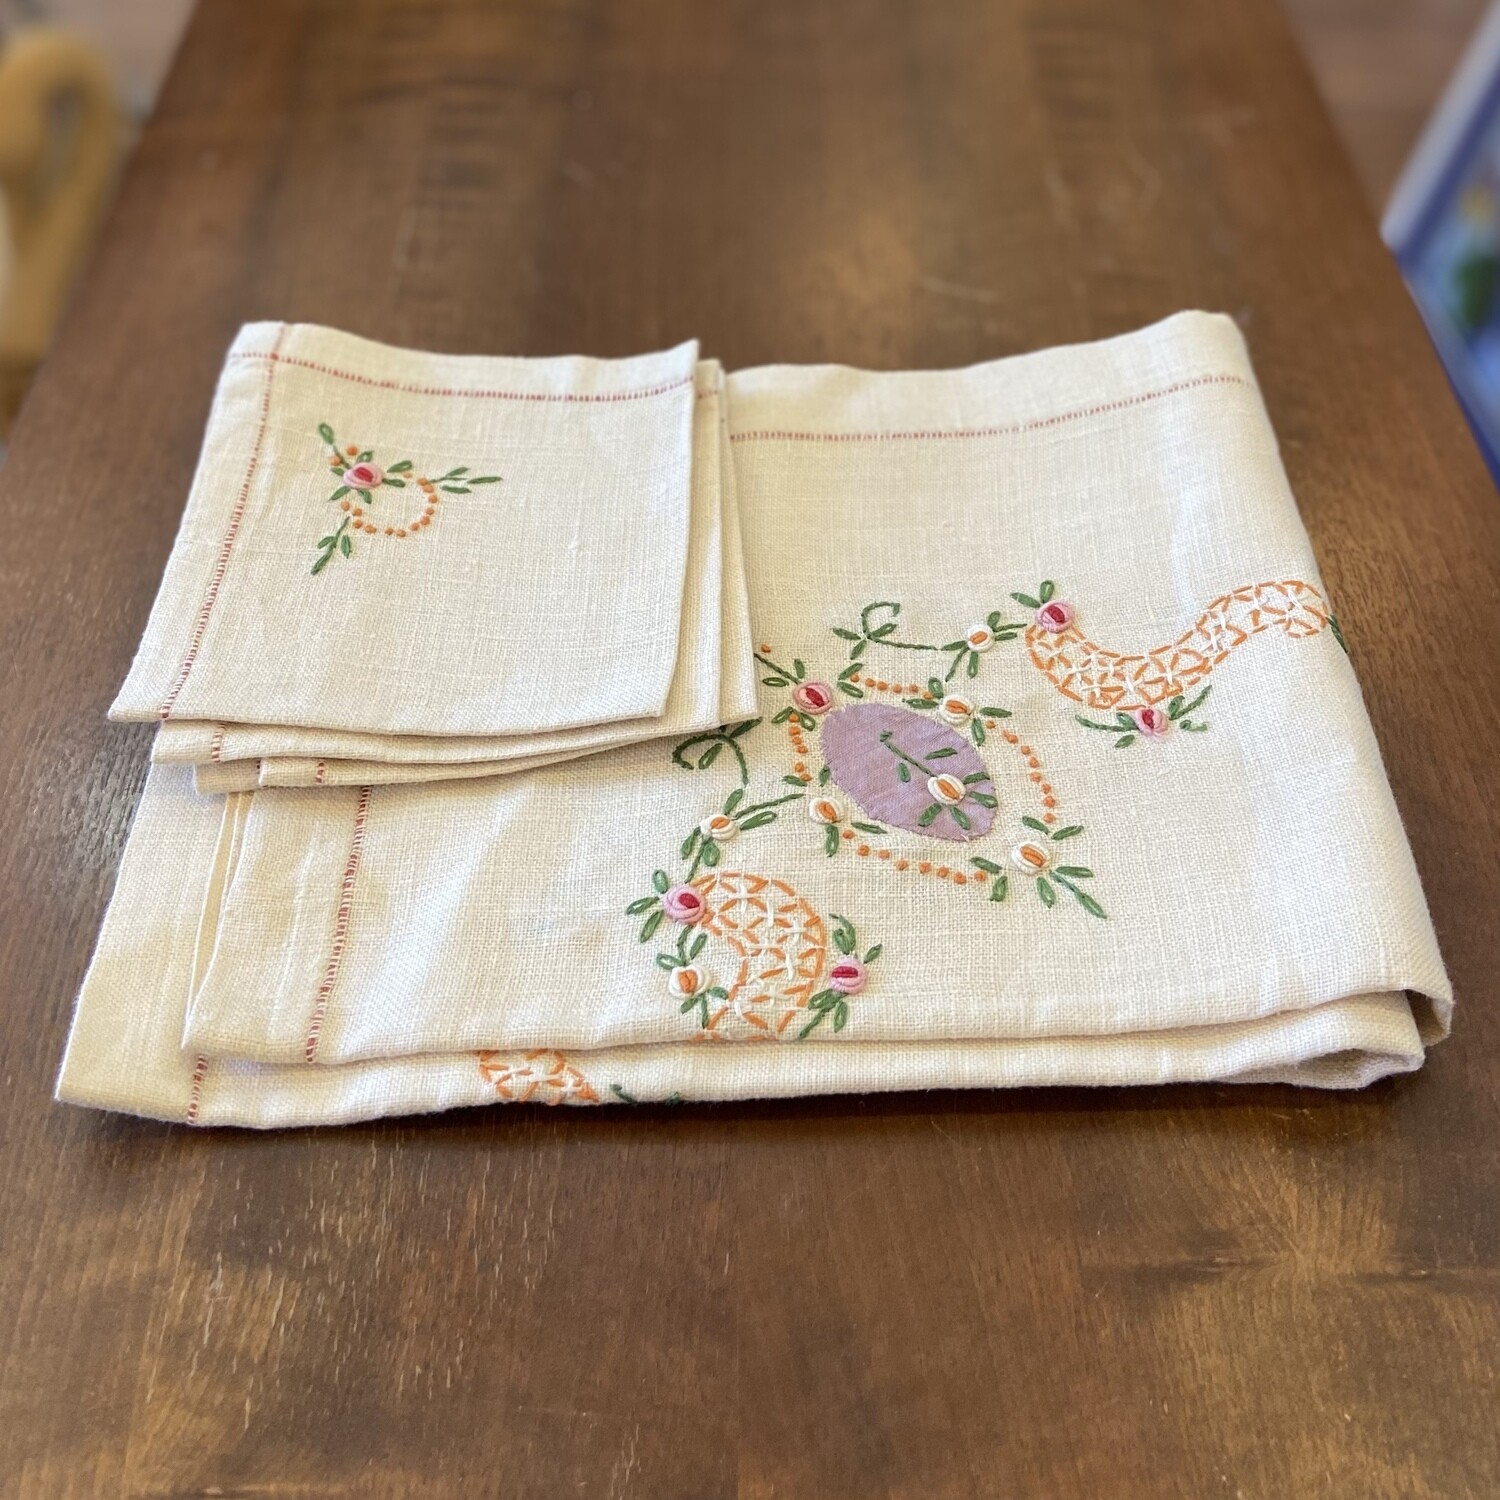 Floral Embroidered White Linen Tablecloth and Napkins (4)